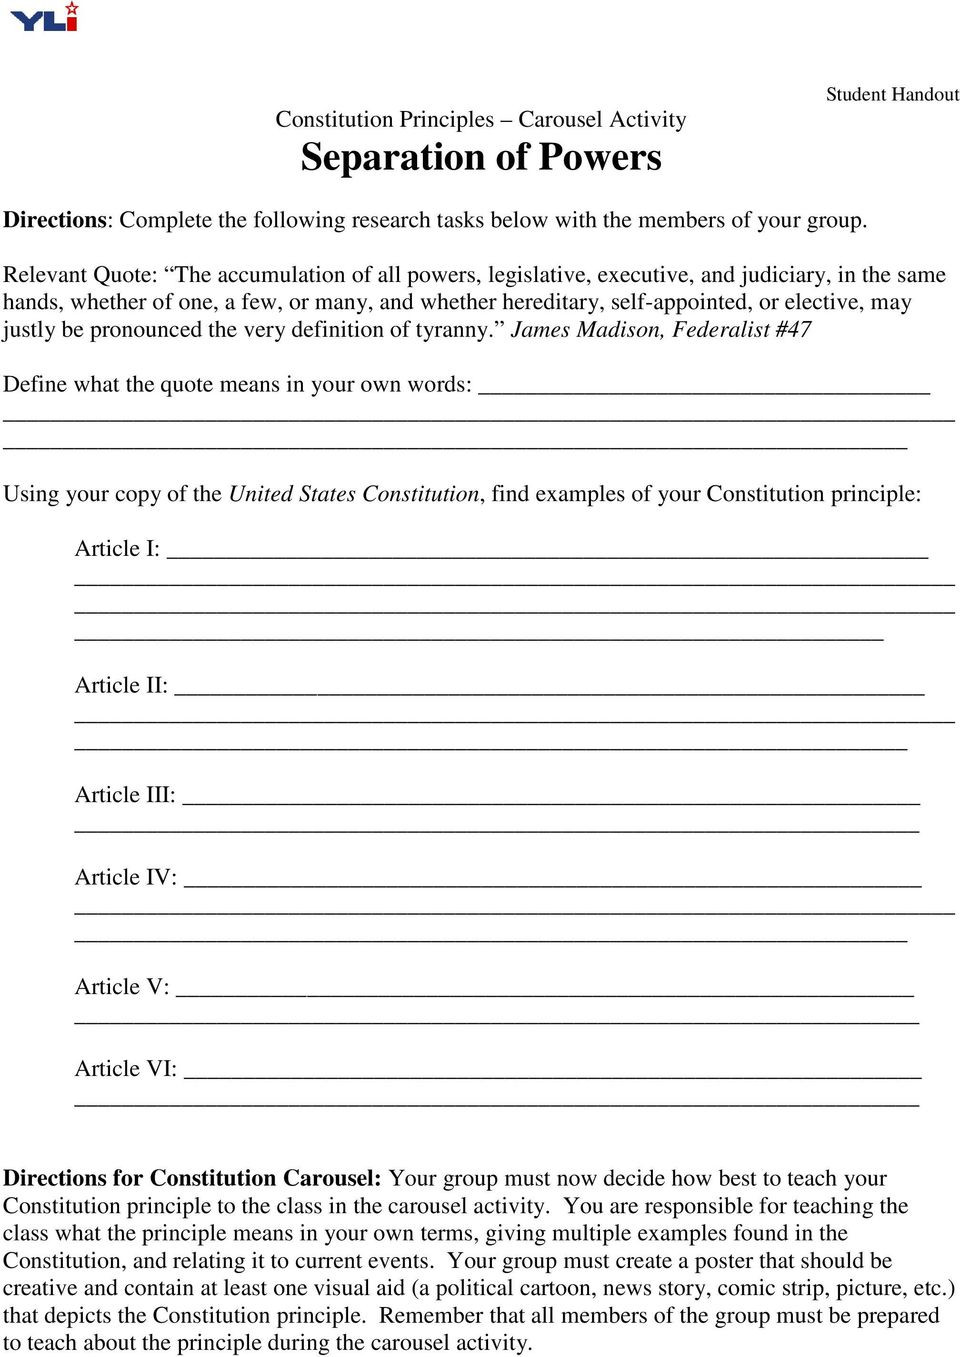 Constitutional Principles Worksheet Answers Four Key Constitutional Principles Pdf Free Download